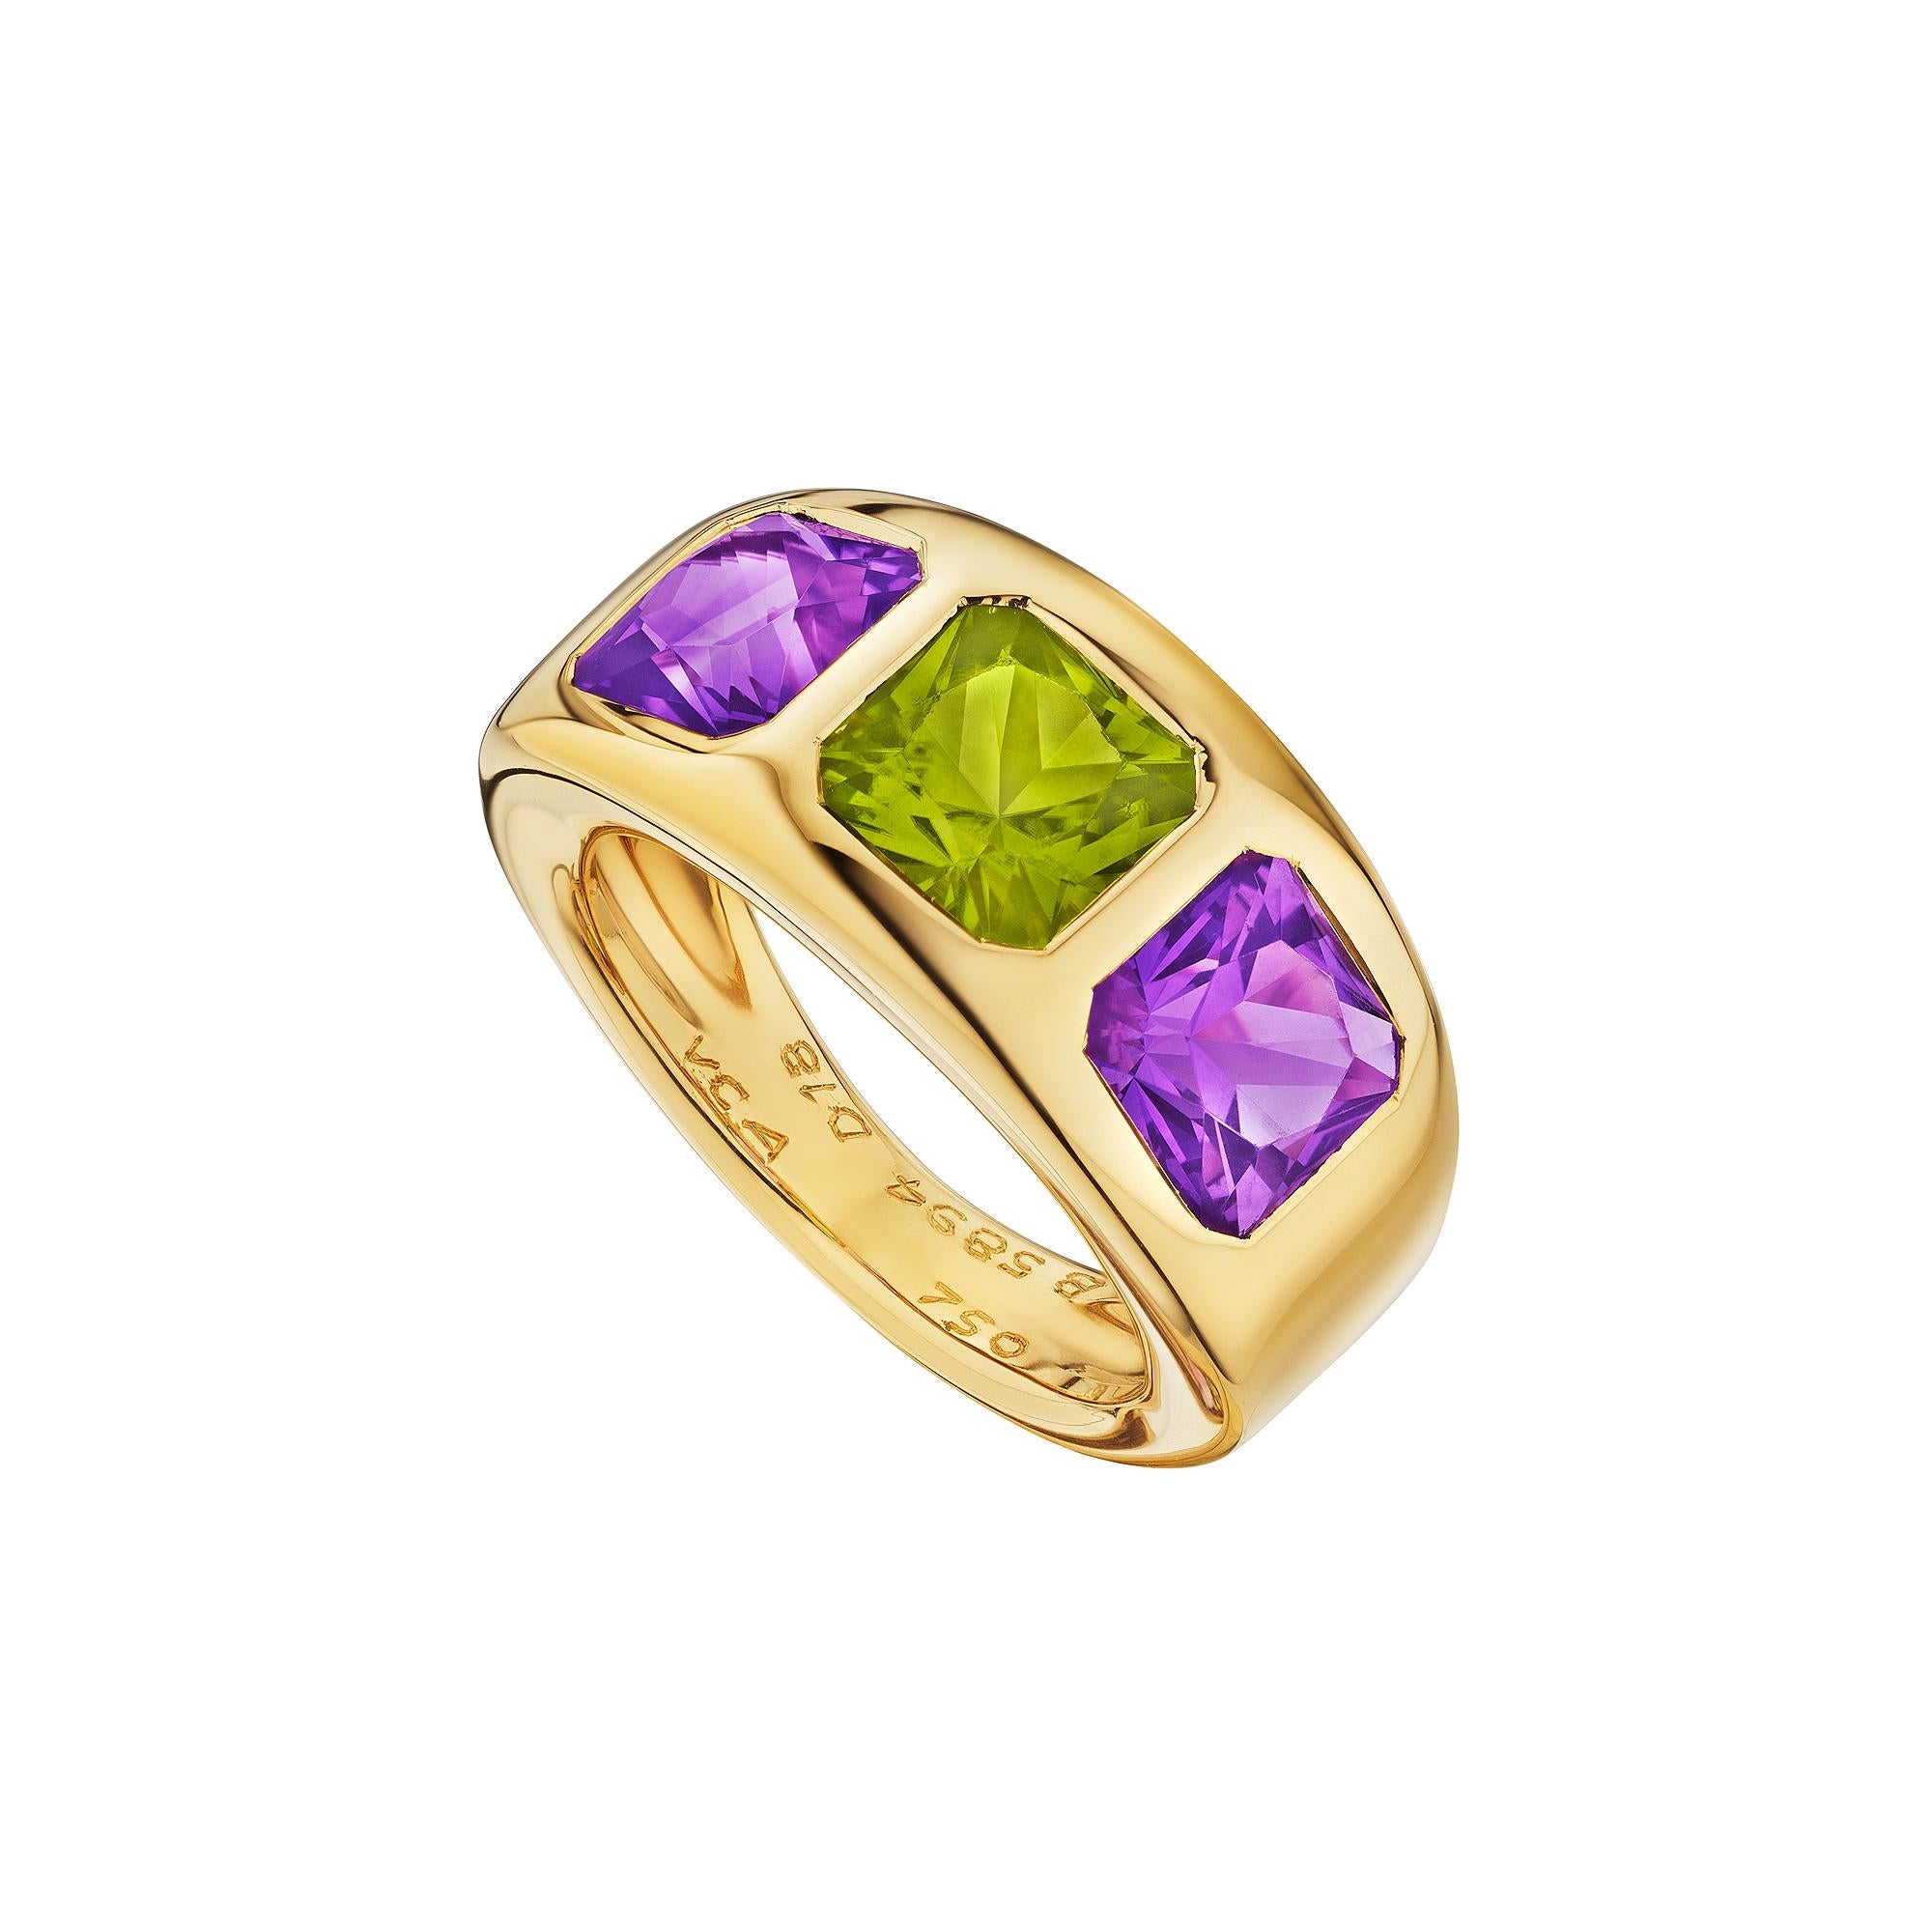 Three's company, and this Van Cleef & Arpels Paris modernist 18 karat polished yellow gold three stone ring is all the companionship you will need.  With one center cushion cut peridot gemstone and two amethyst side stones, this exciting